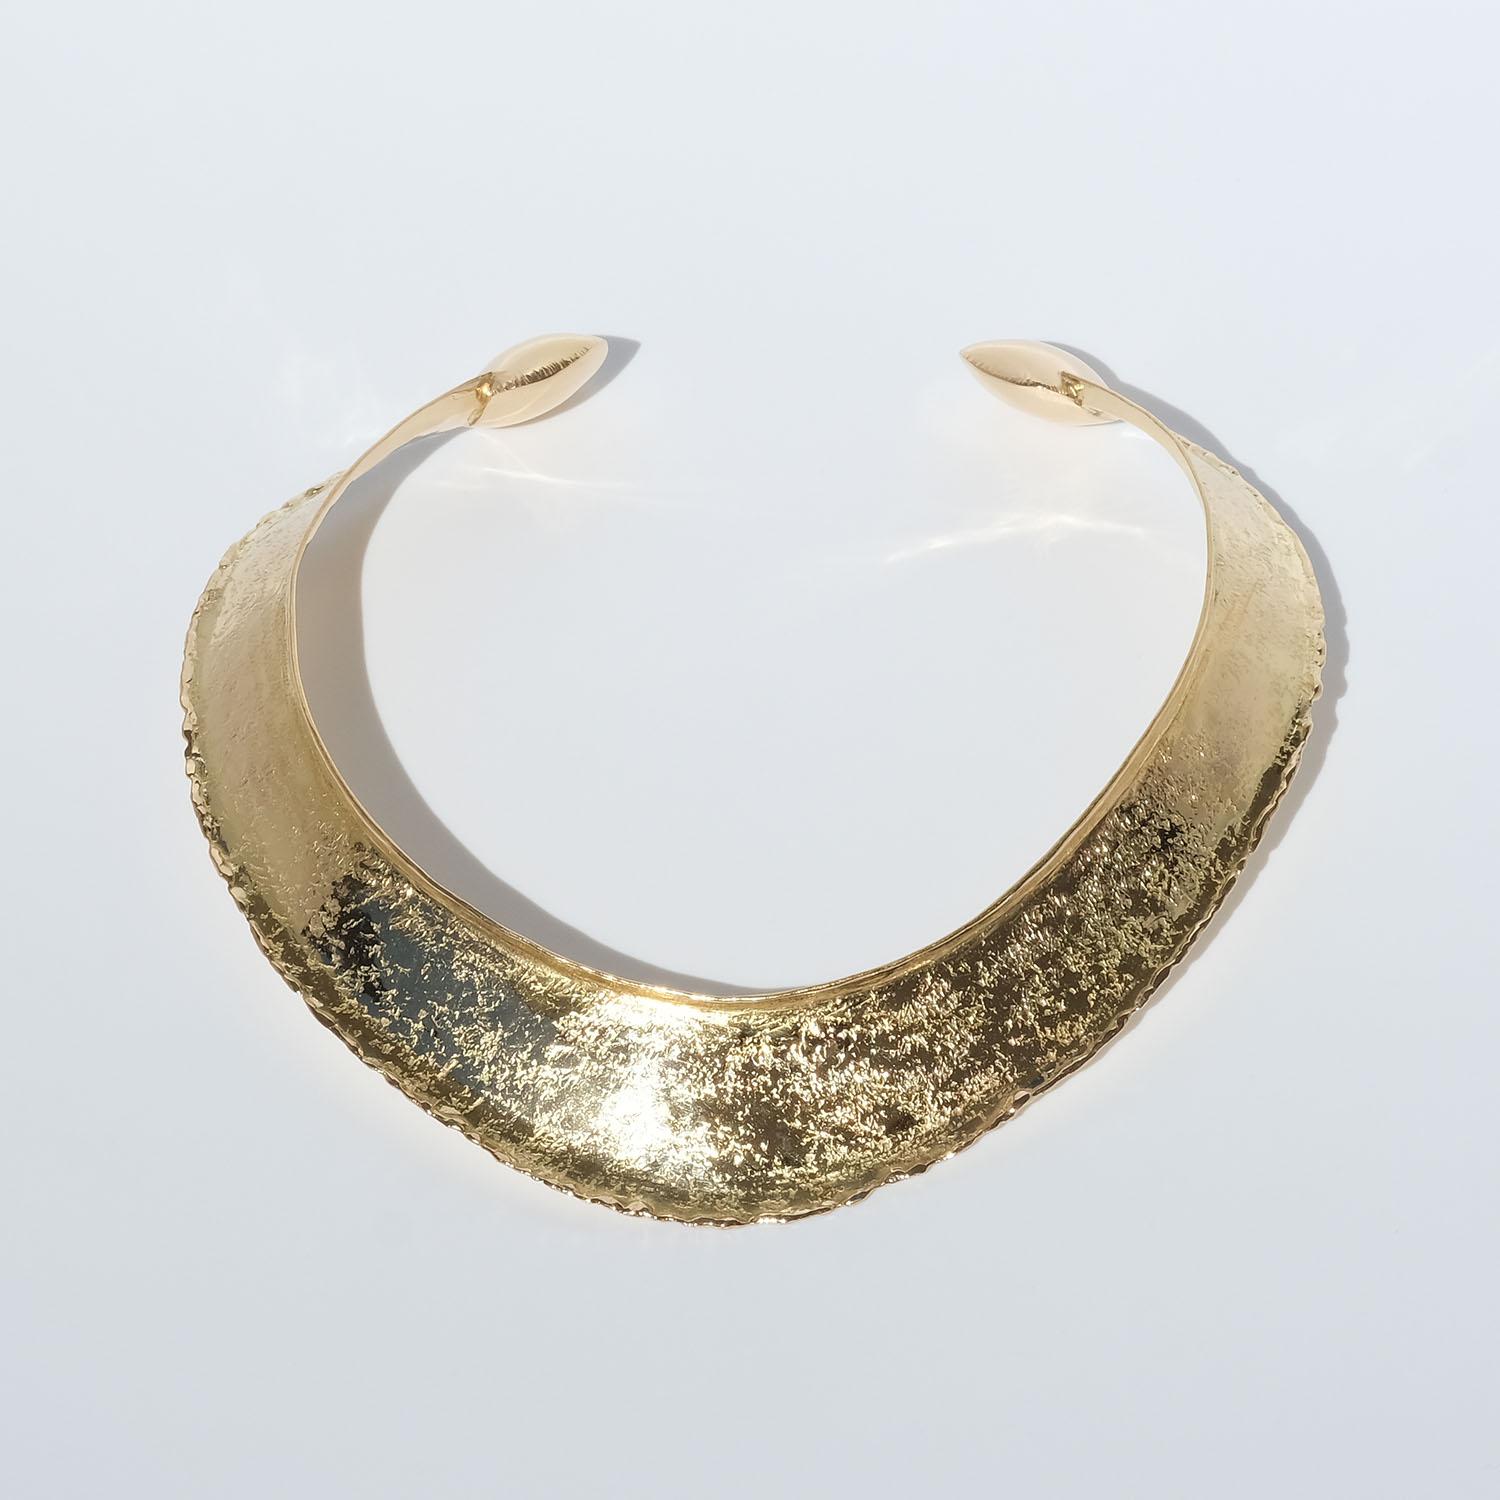 This 18 karat gold neck ring has a shiny, textured surface. The shape of the neck ring may be described as semi oval with an accentuated front. The neck ring's arms are equipped with square-shaped golden pillows on its ends.

The neck ring looks